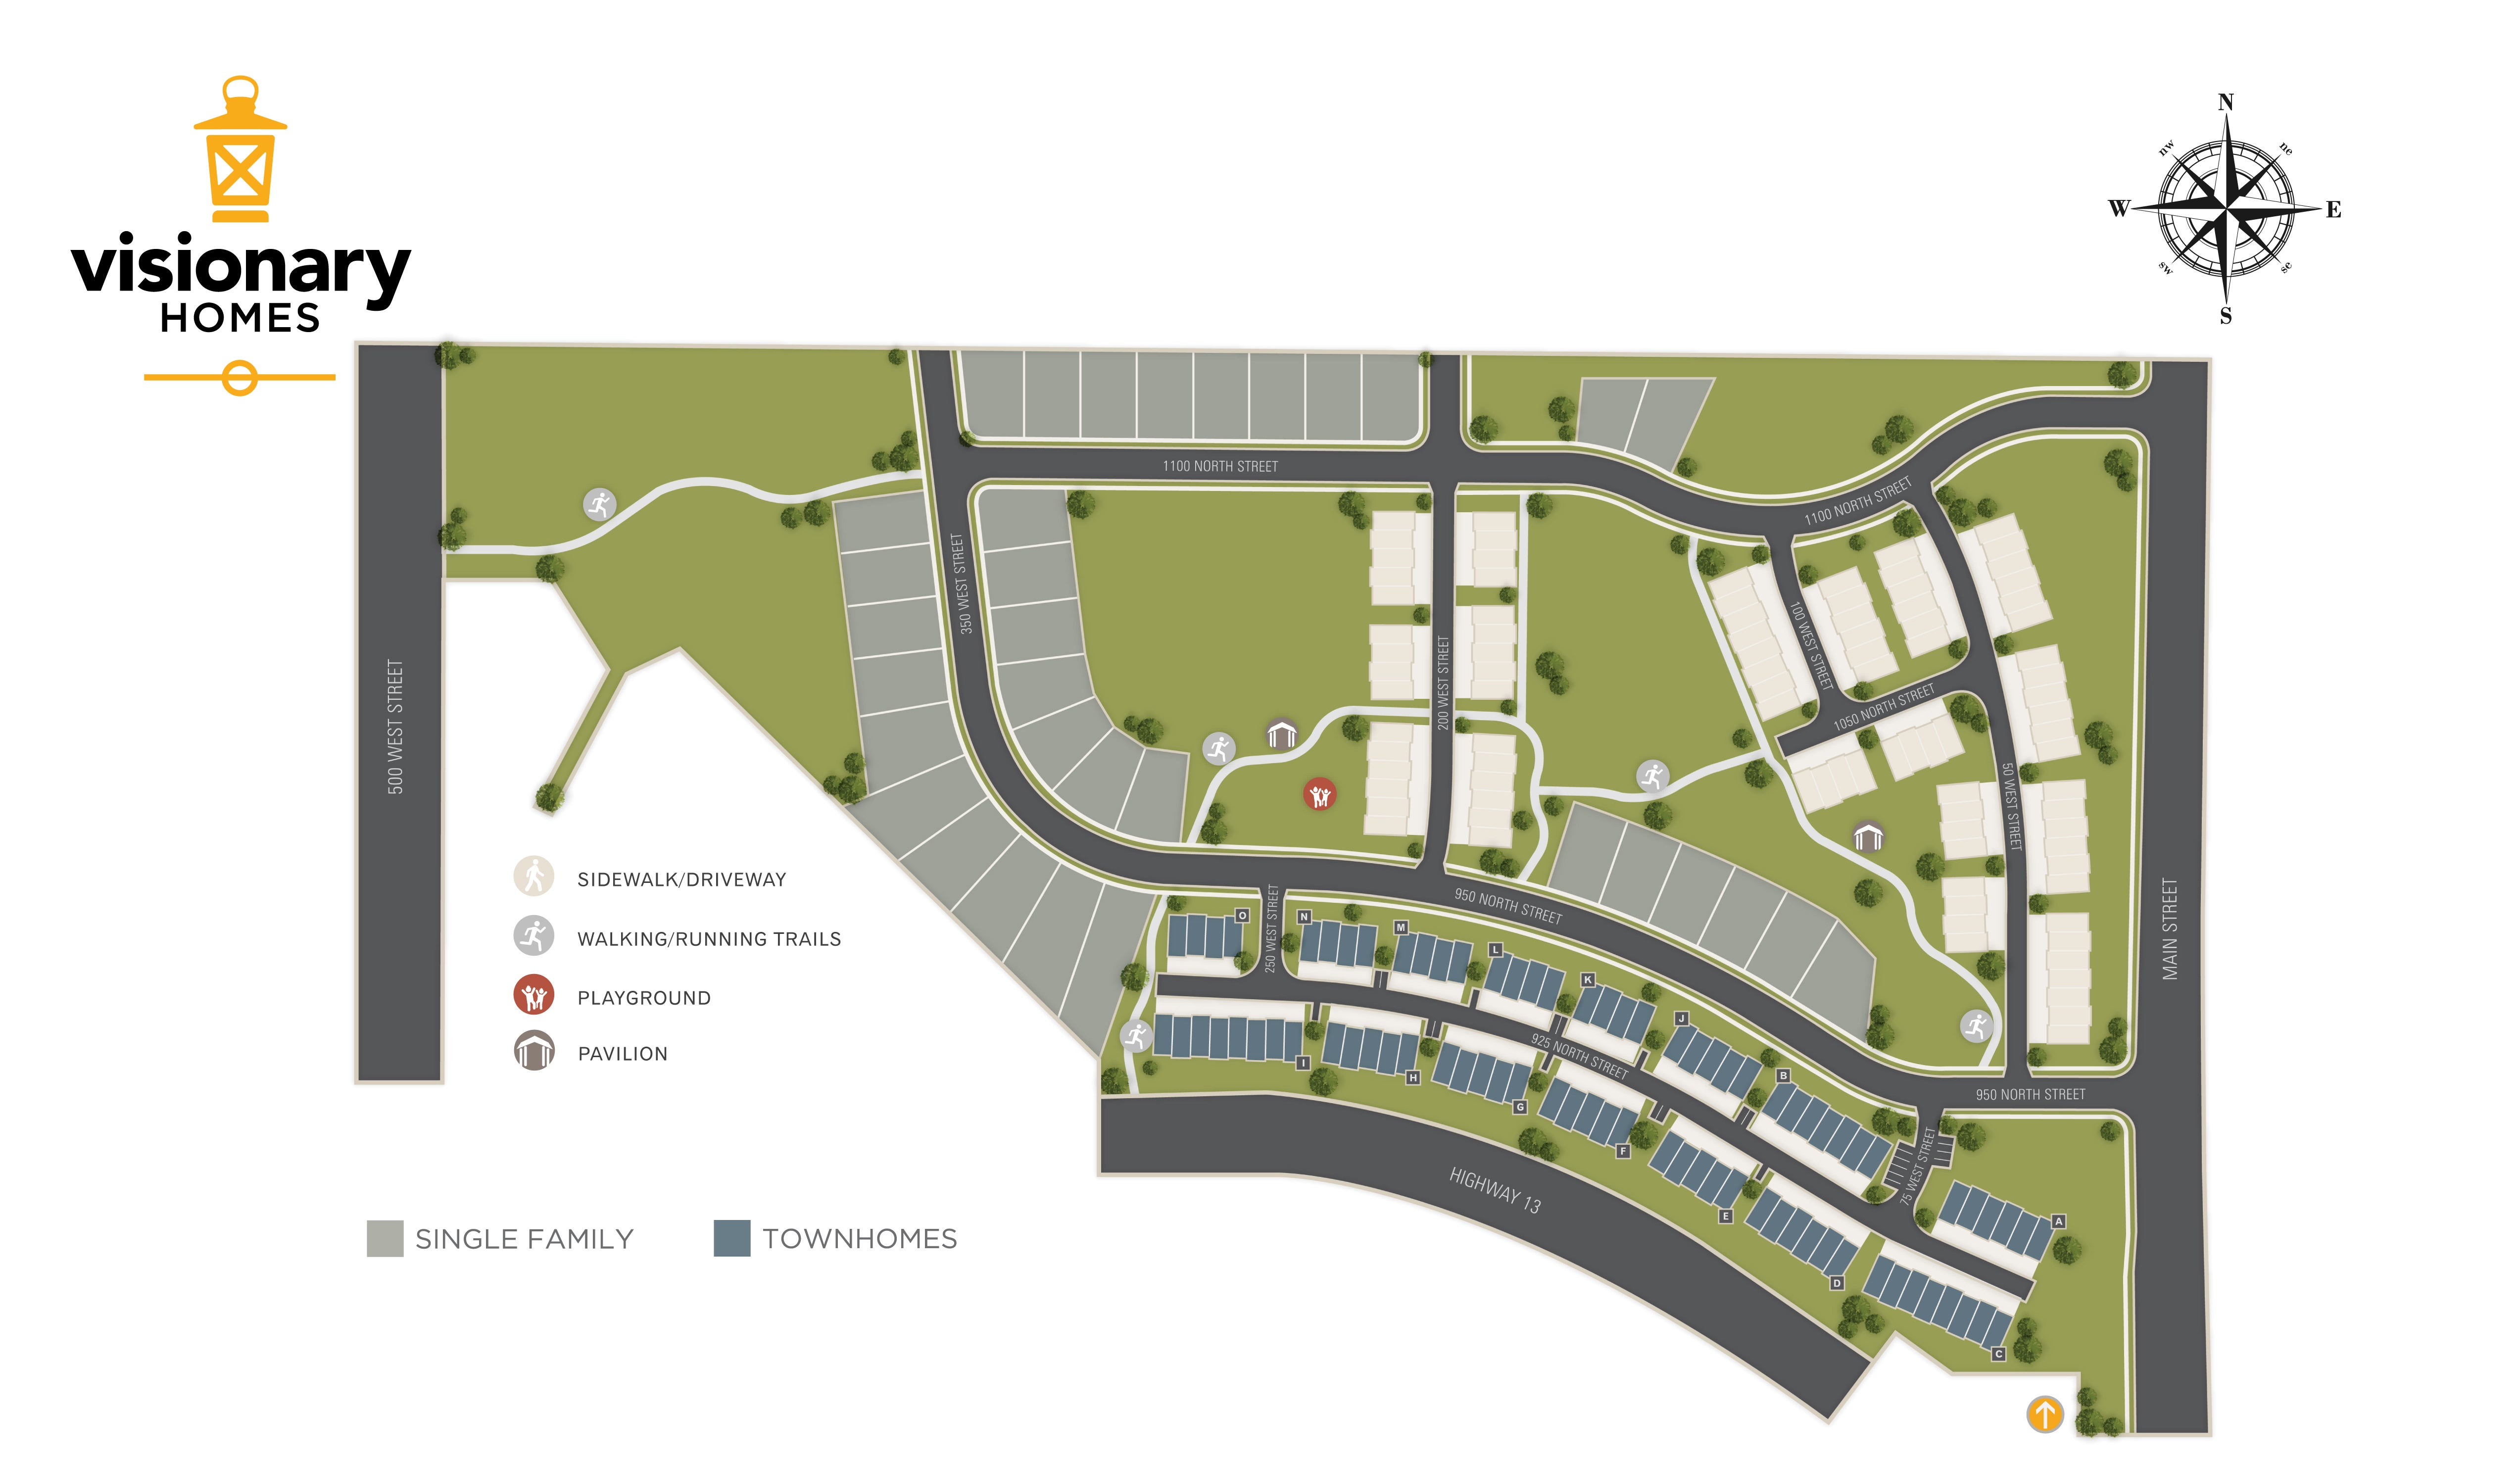 Brigham City, UT North Point - Brigham City (Townhomes) New Homes from Visionary Homes